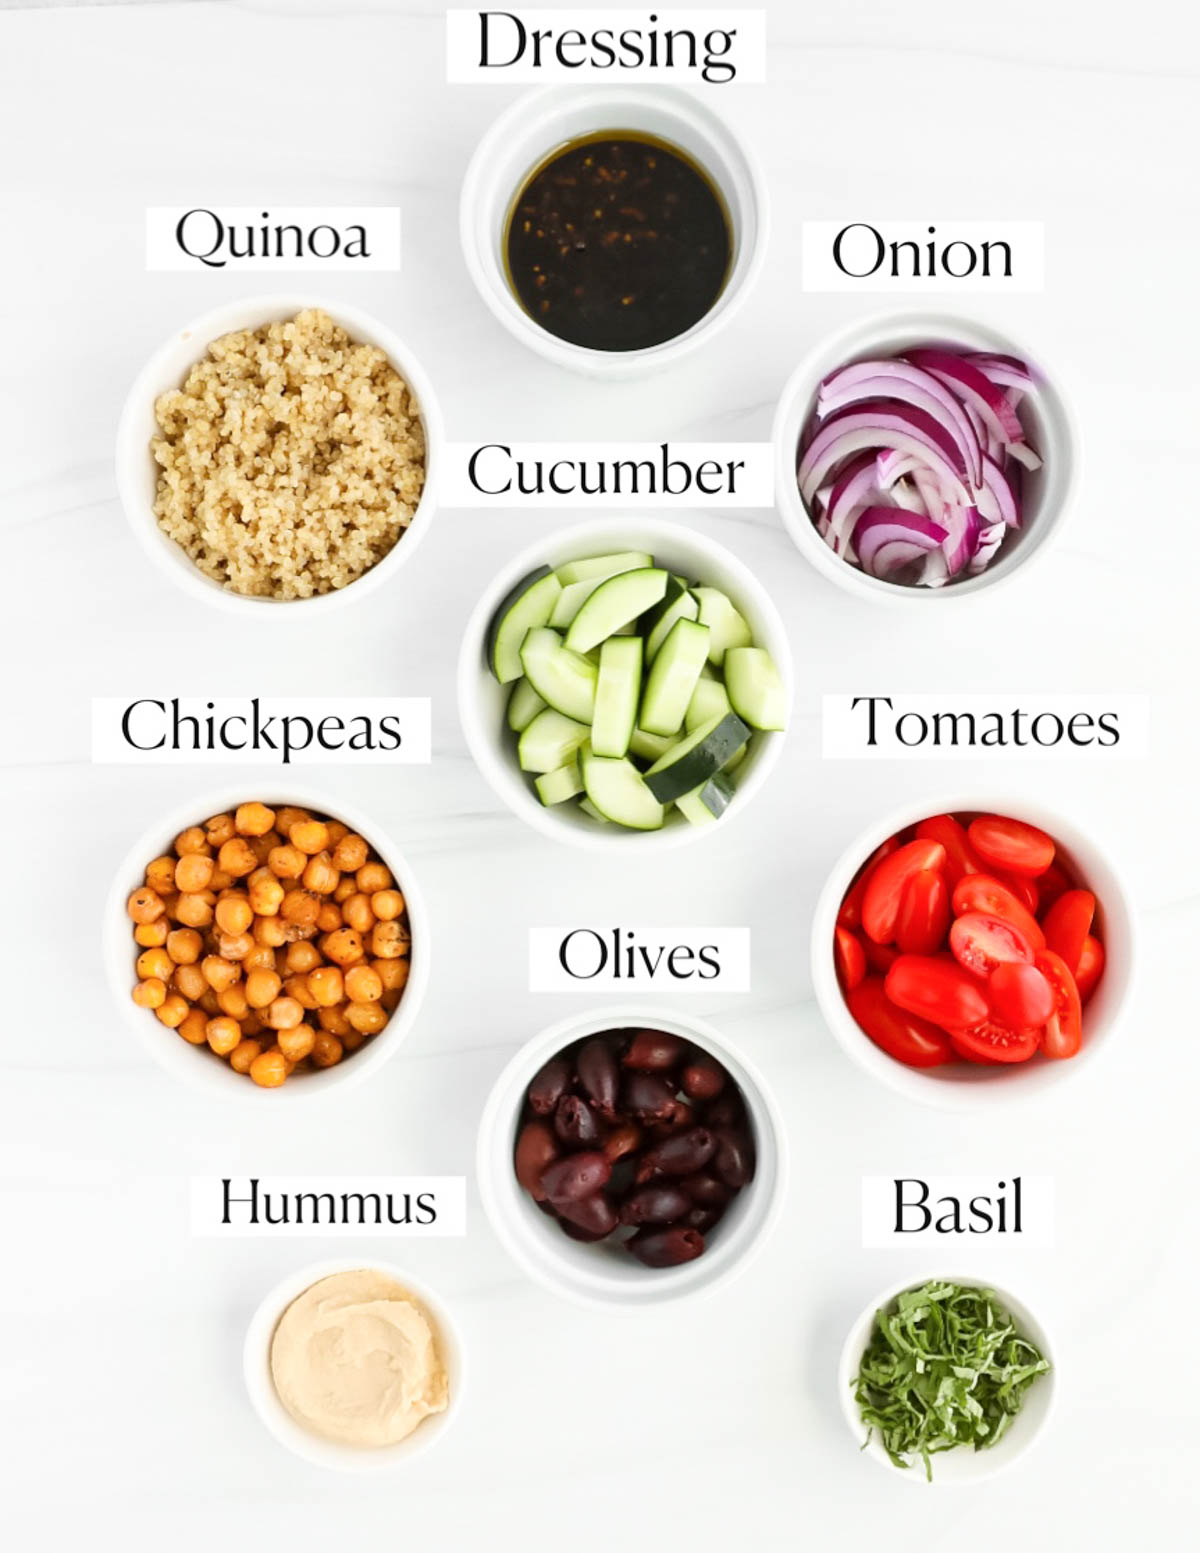 Labeled ingredients in small white bowls including: dressing, quinoa, onion, cucumber, chickpeas, tomatoes, olives, basil, and hummus.